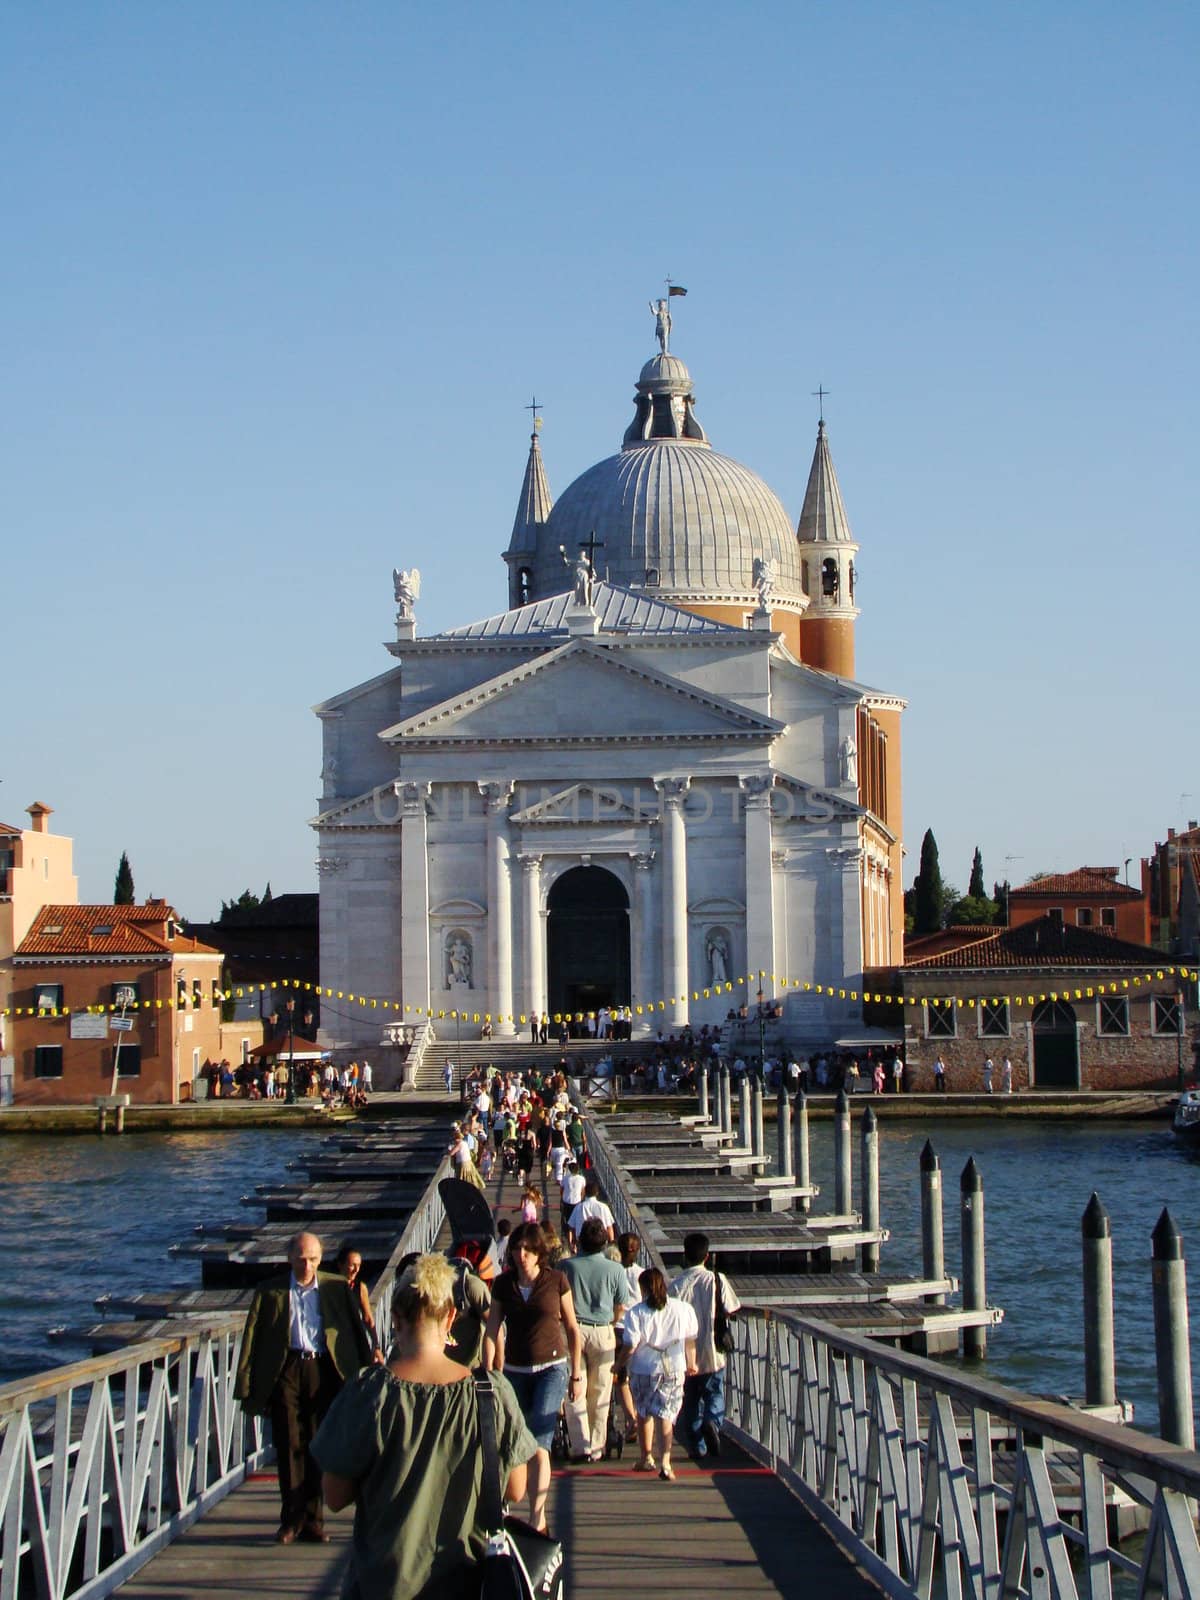 Bridge over canal Giudecca during Fiesta of Redentore, one the most important venetian holidays, Venice, Italy